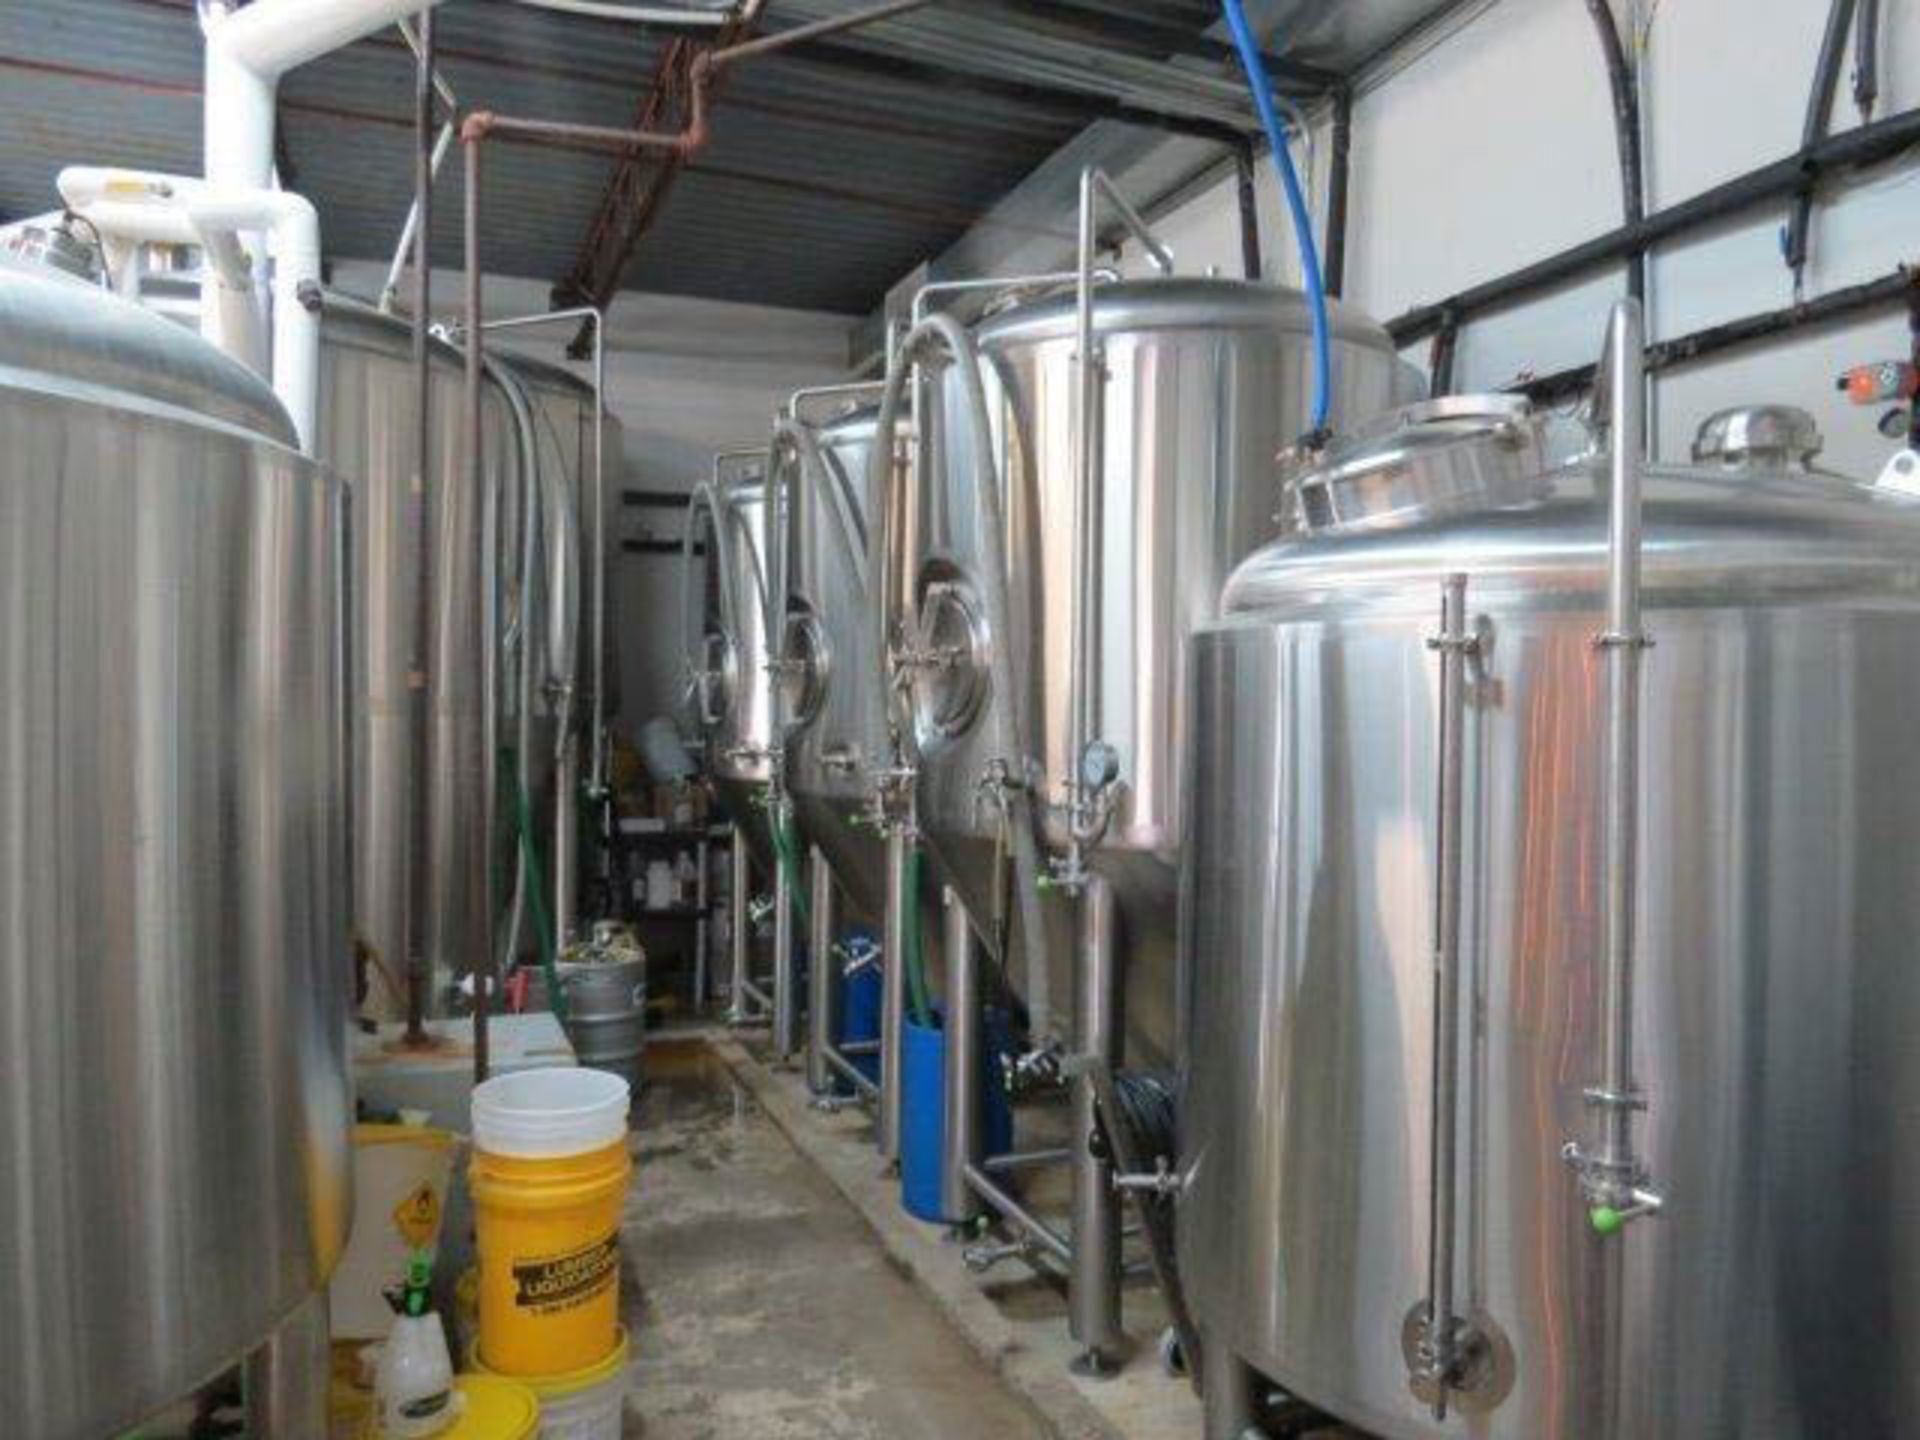 30 BBL S/S Fermenter (Location: Mabank, TX) - Rigging Fee: $750